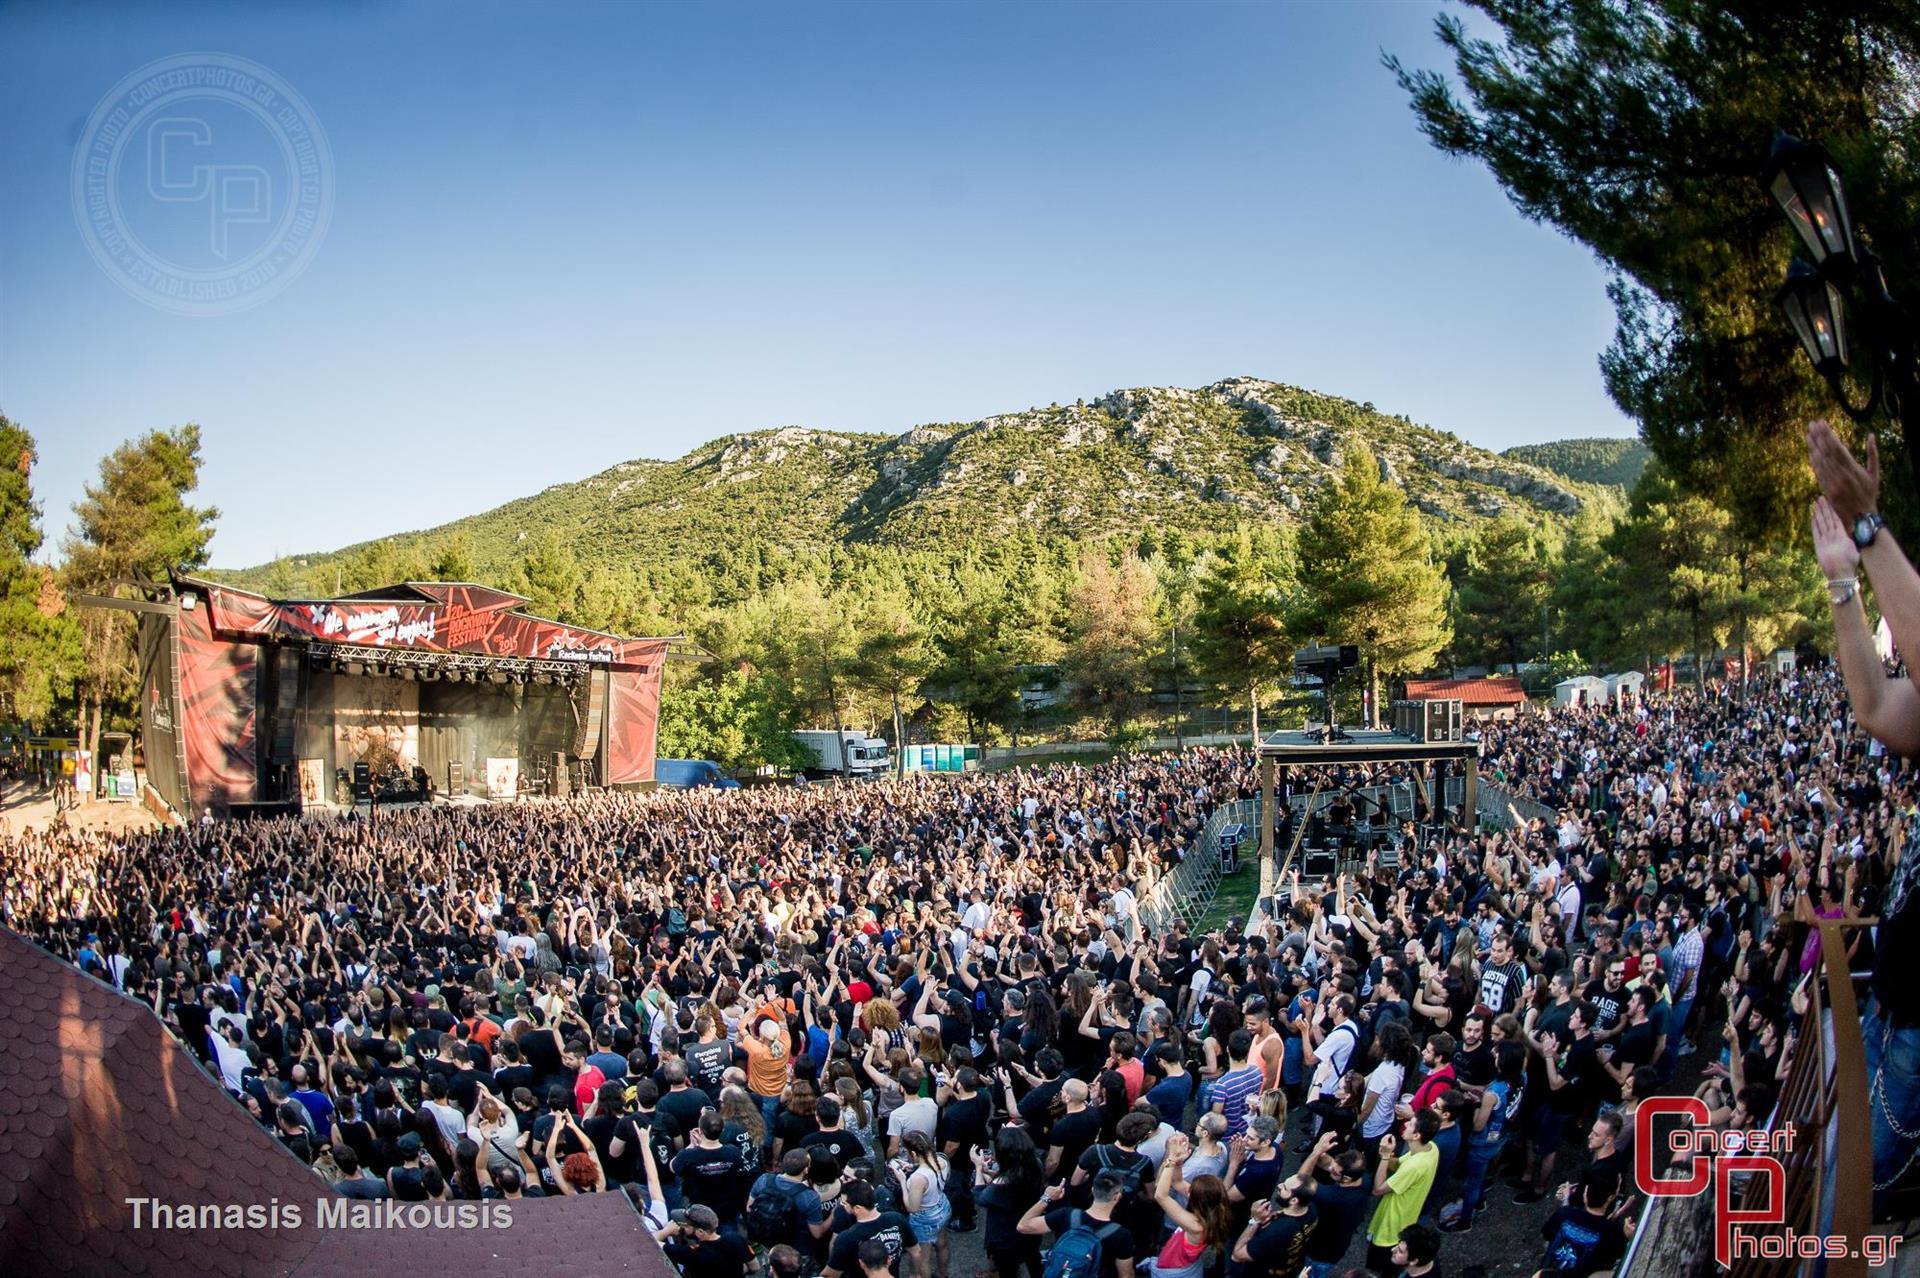 Rockwave 2015 - Day 3-Rockwave 2015 - Day 3 photographer: Thanasis Maikousis - ConcertPhotos - 20150704_1824_45